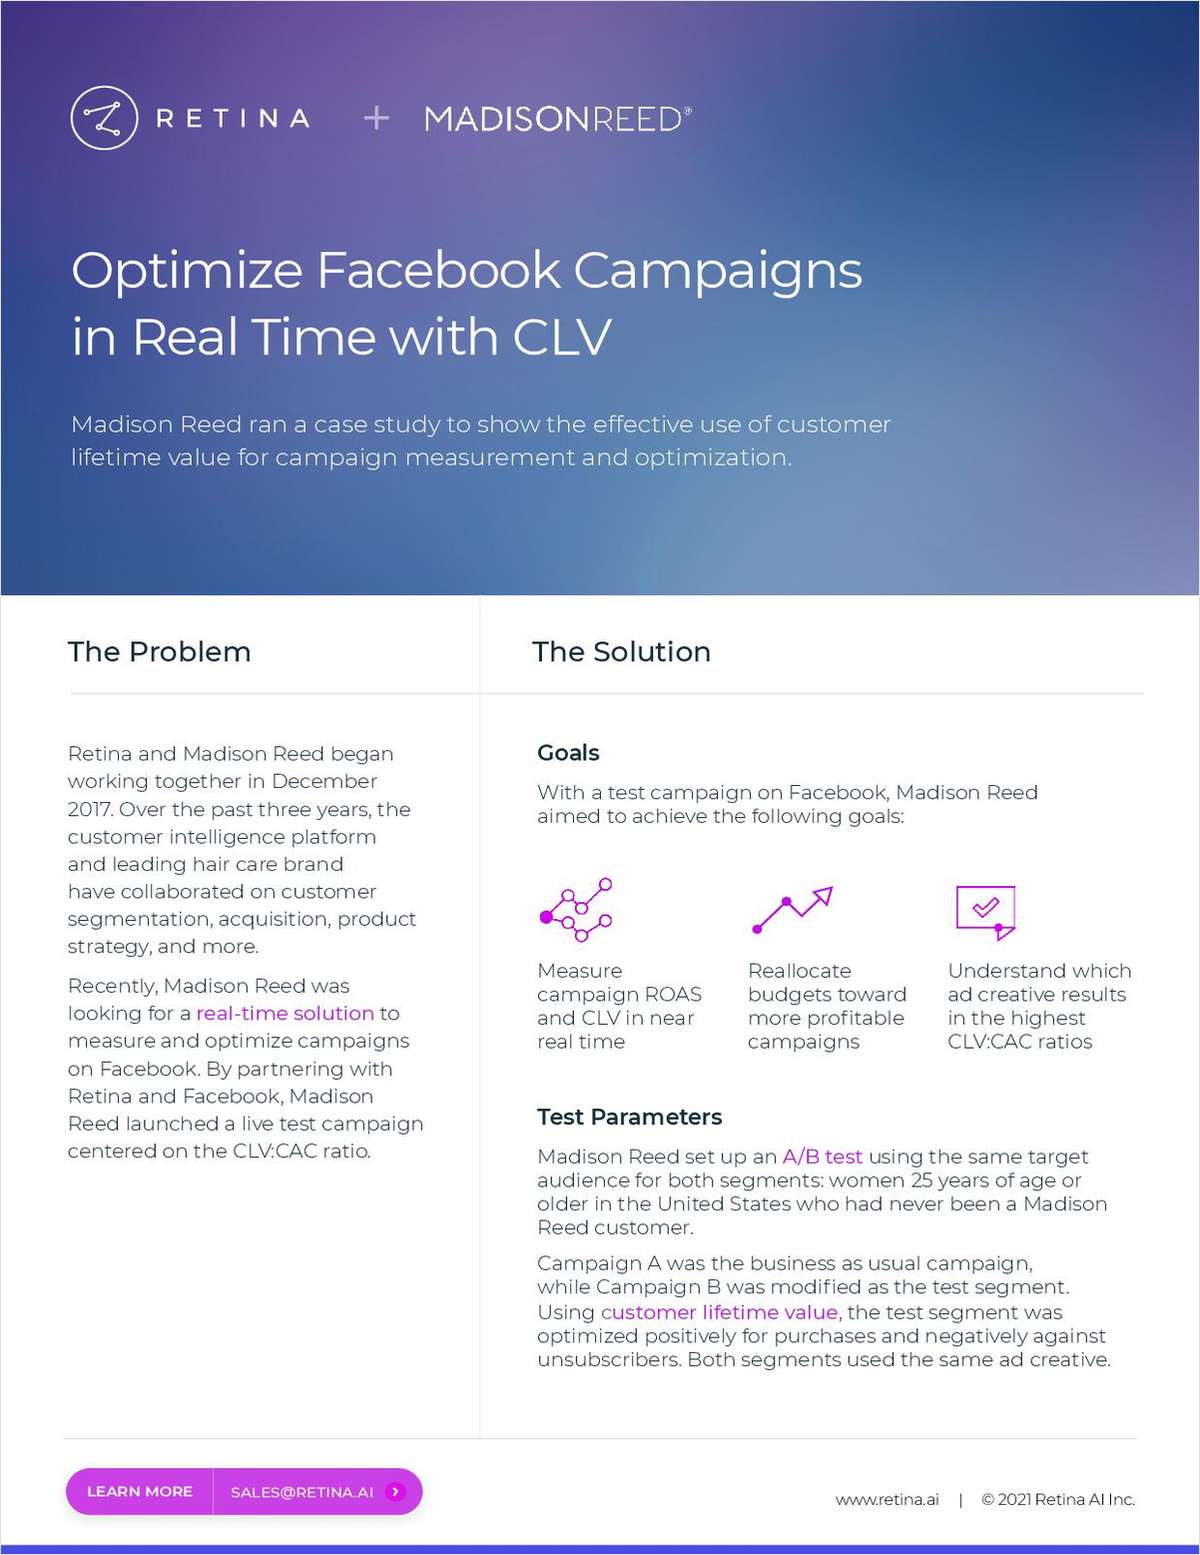 Optimize Facebook Campaigns in Real Time with CLV